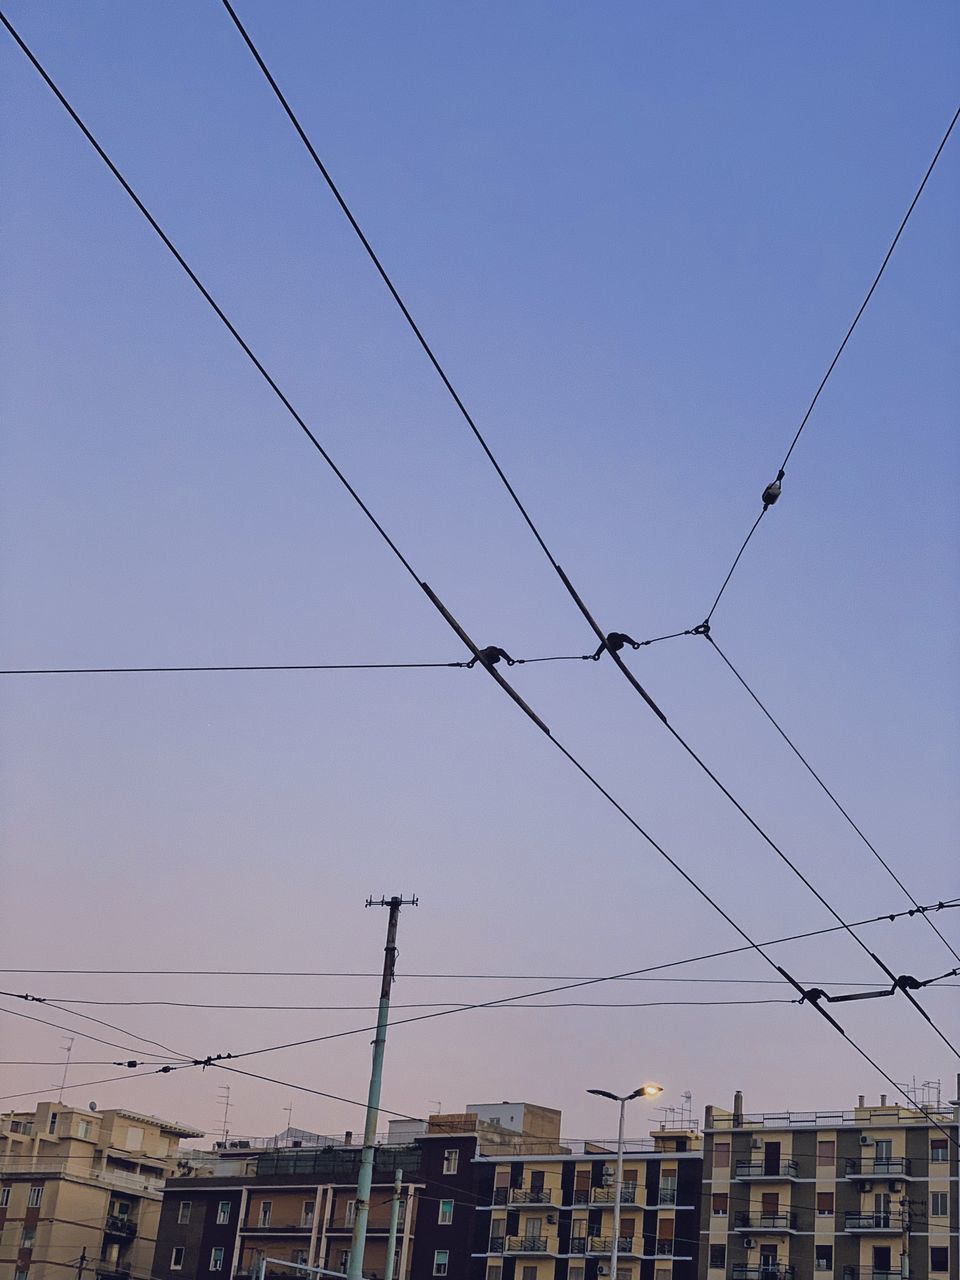 LOW ANGLE VIEW OF CABLES AGAINST BUILDINGS IN CITY